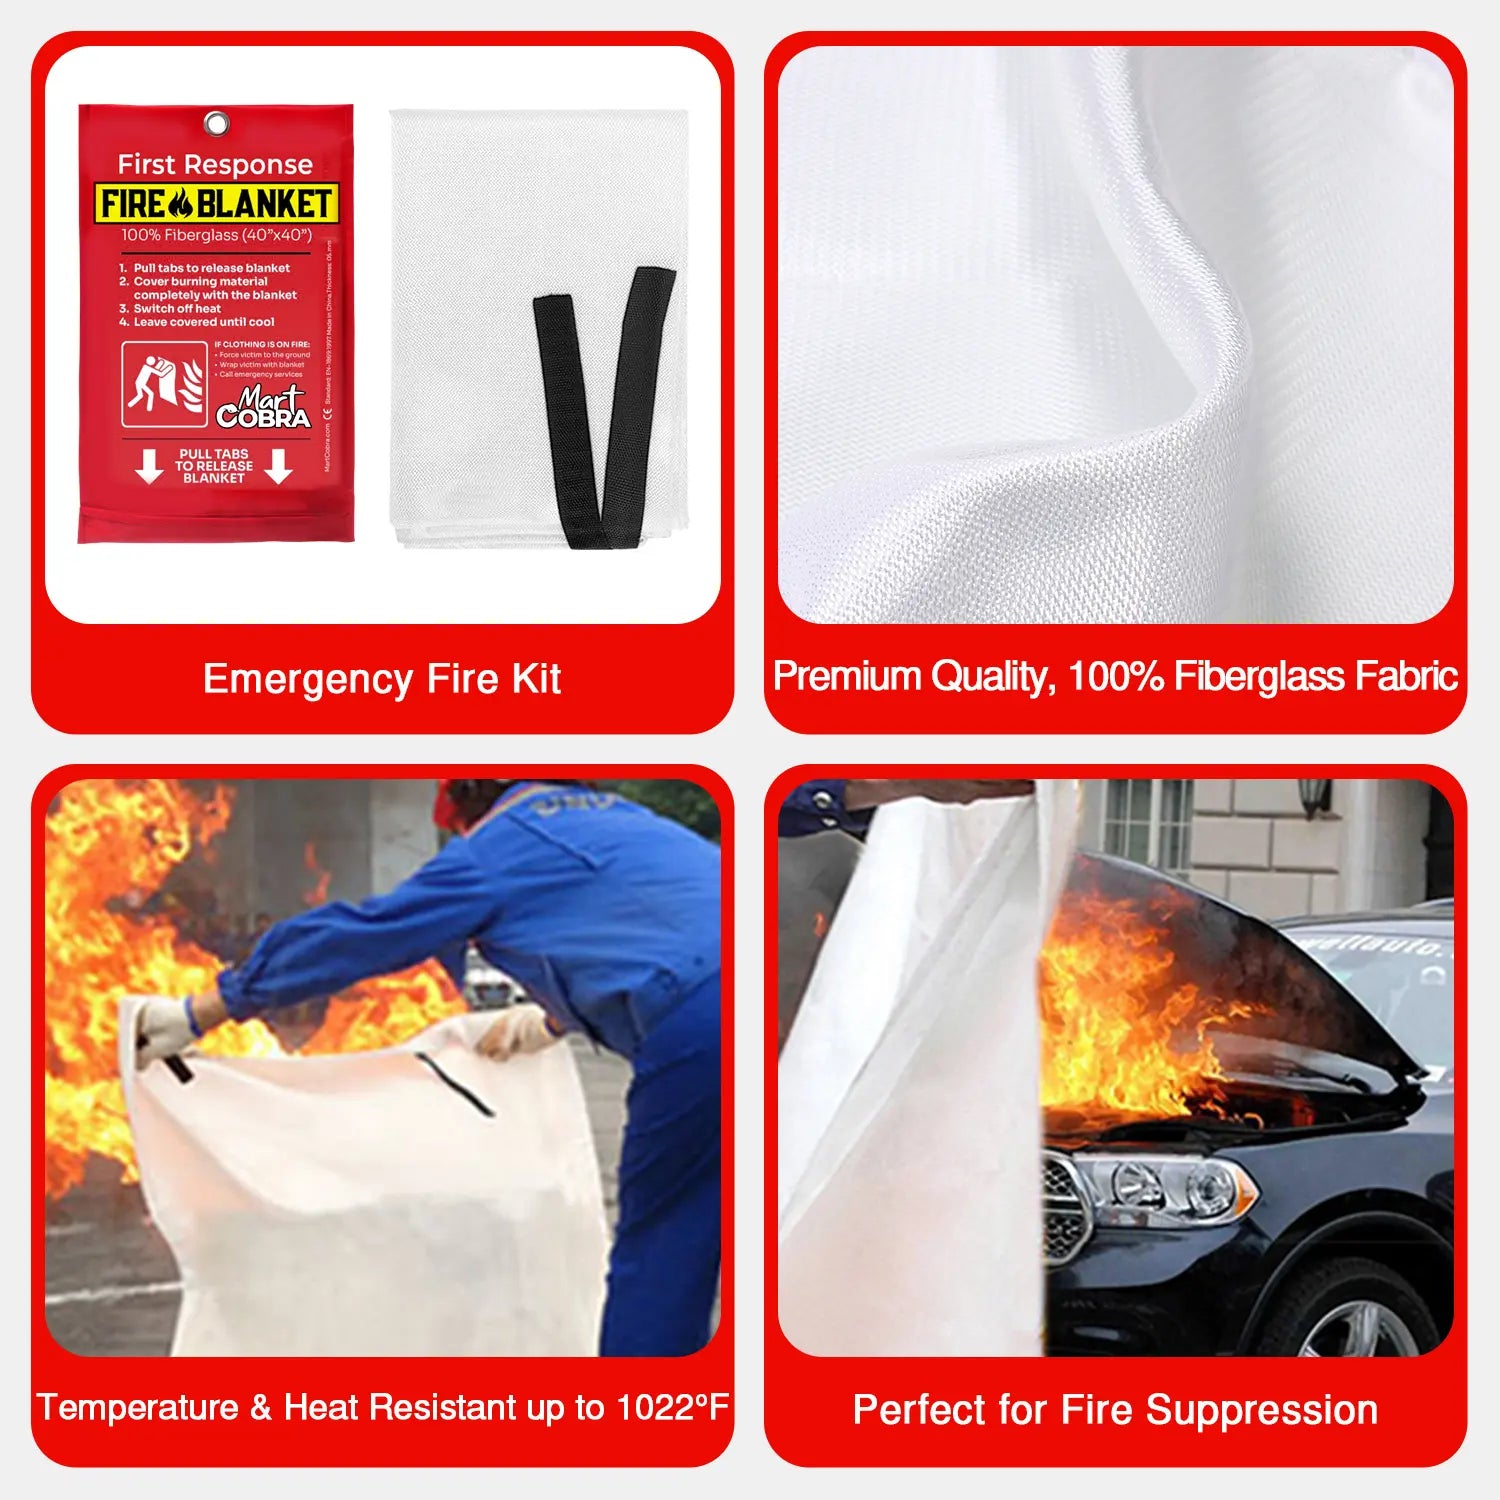 fire blanket uses